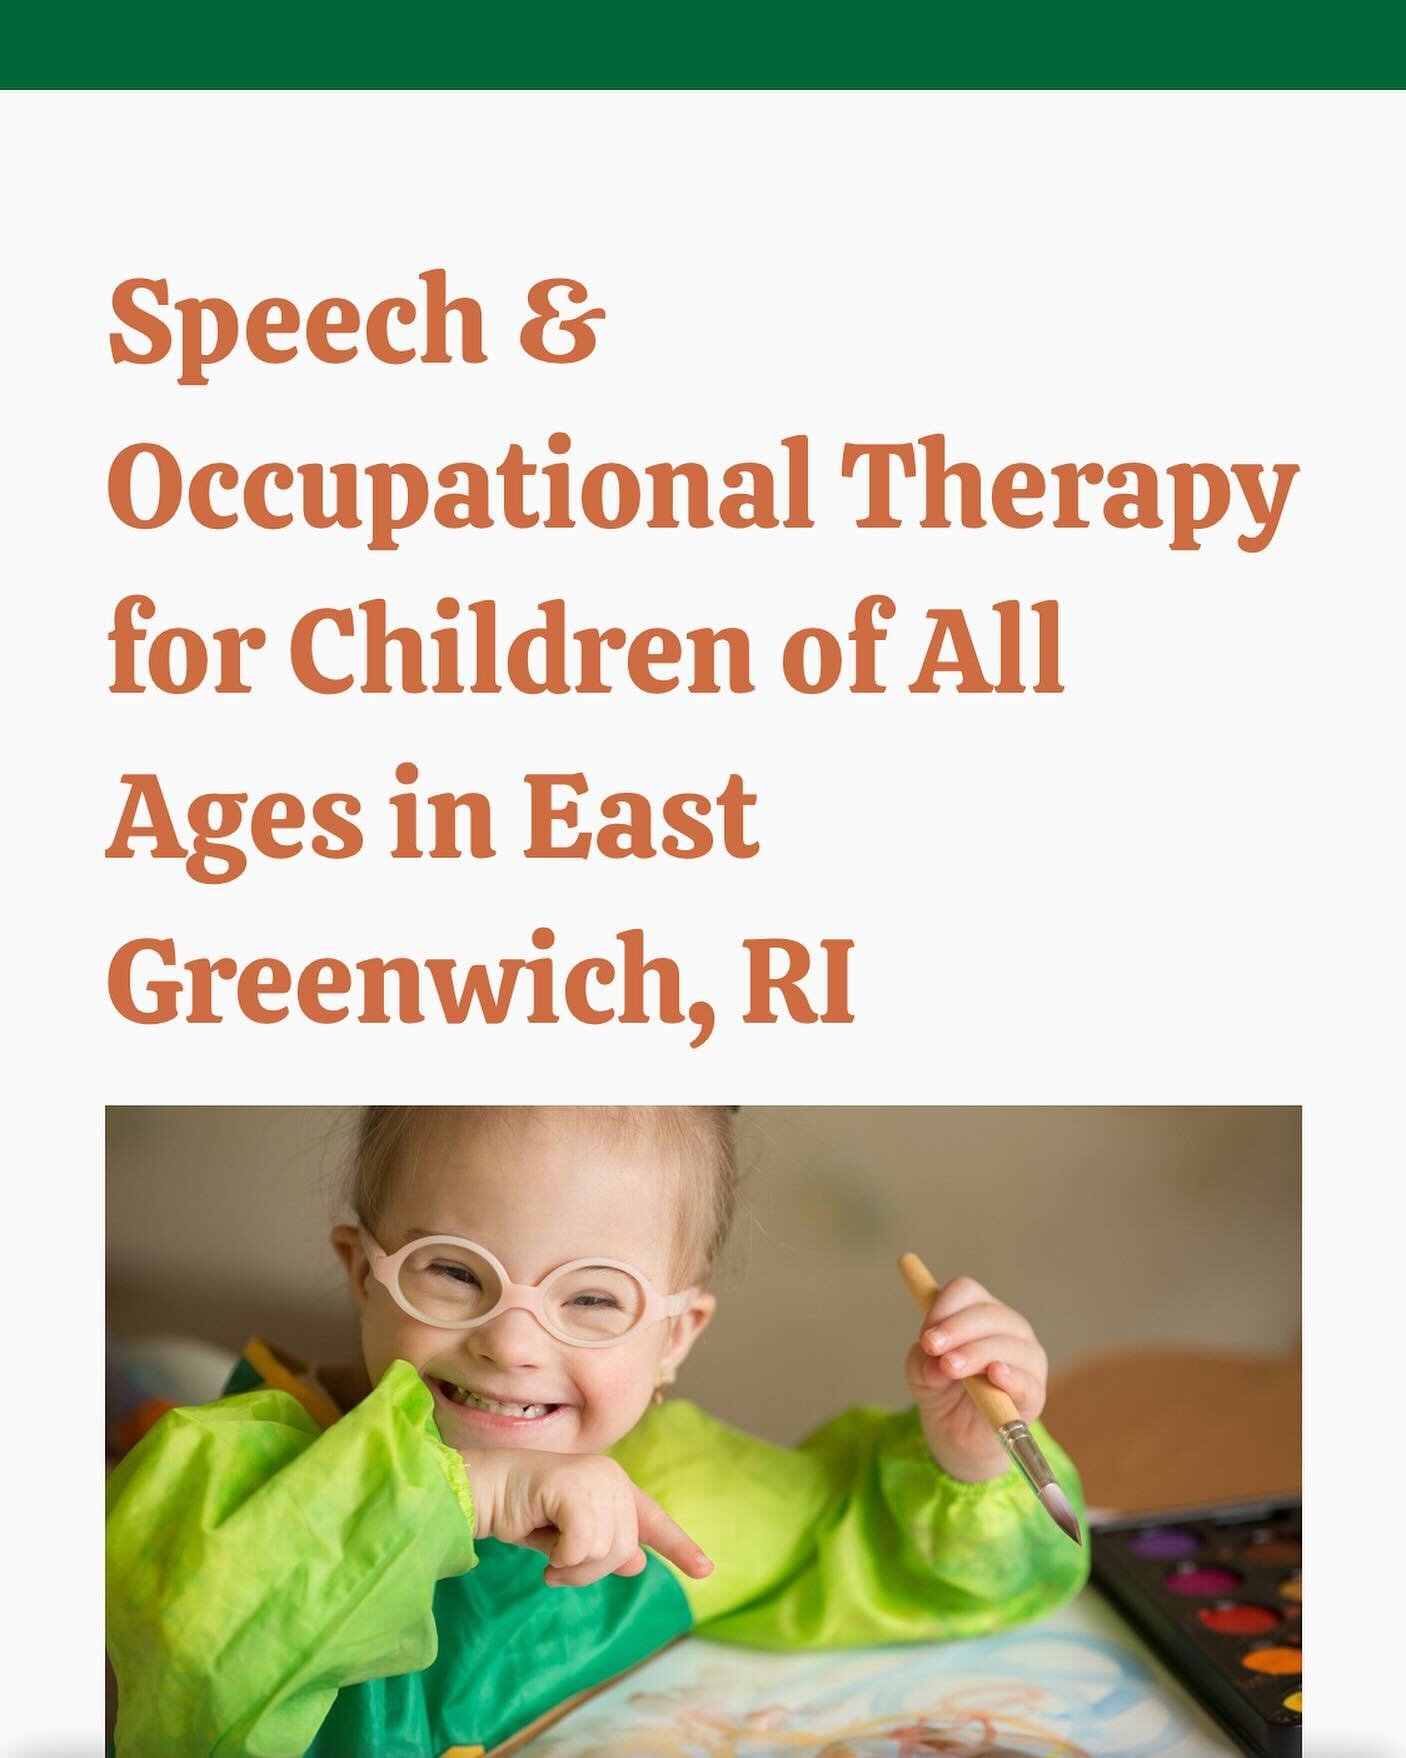 Excited to announce the launch of our new website! 🚀 Click the link in our bio to explore and make an appointment today!
#acorntherapysolutions 
#speechdelay #speechtherapyclinic #occupationaltherapyclinic